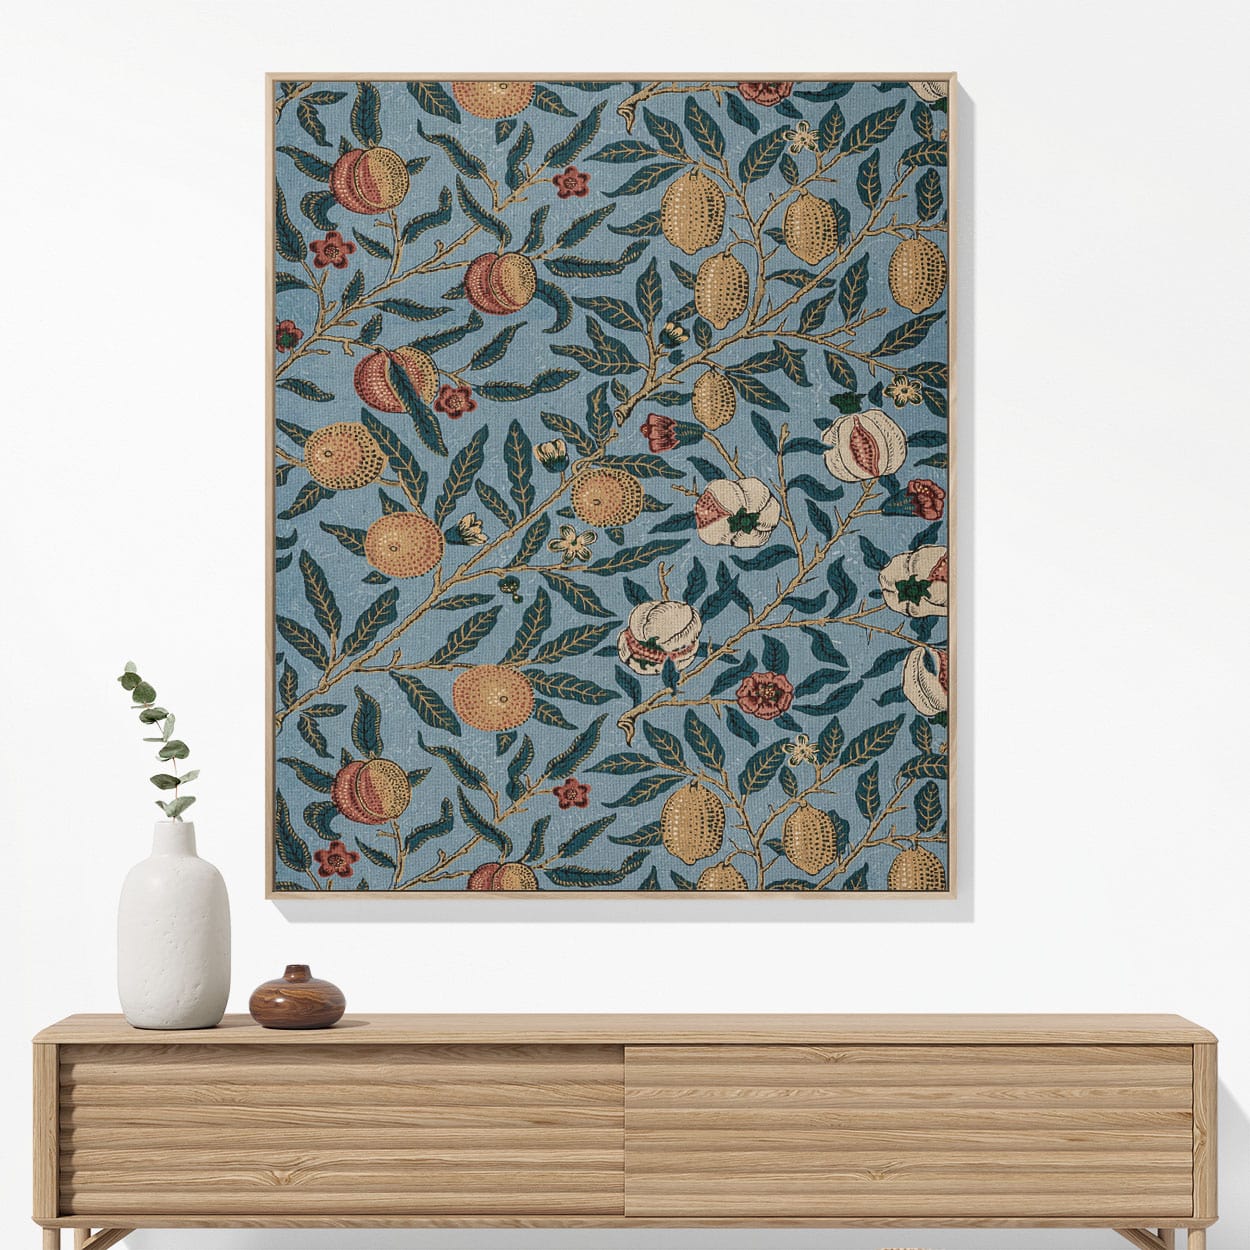 Eclectic Plants Woven Blanket Woven Blanket Hanging on a Wall as Framed Wall Art